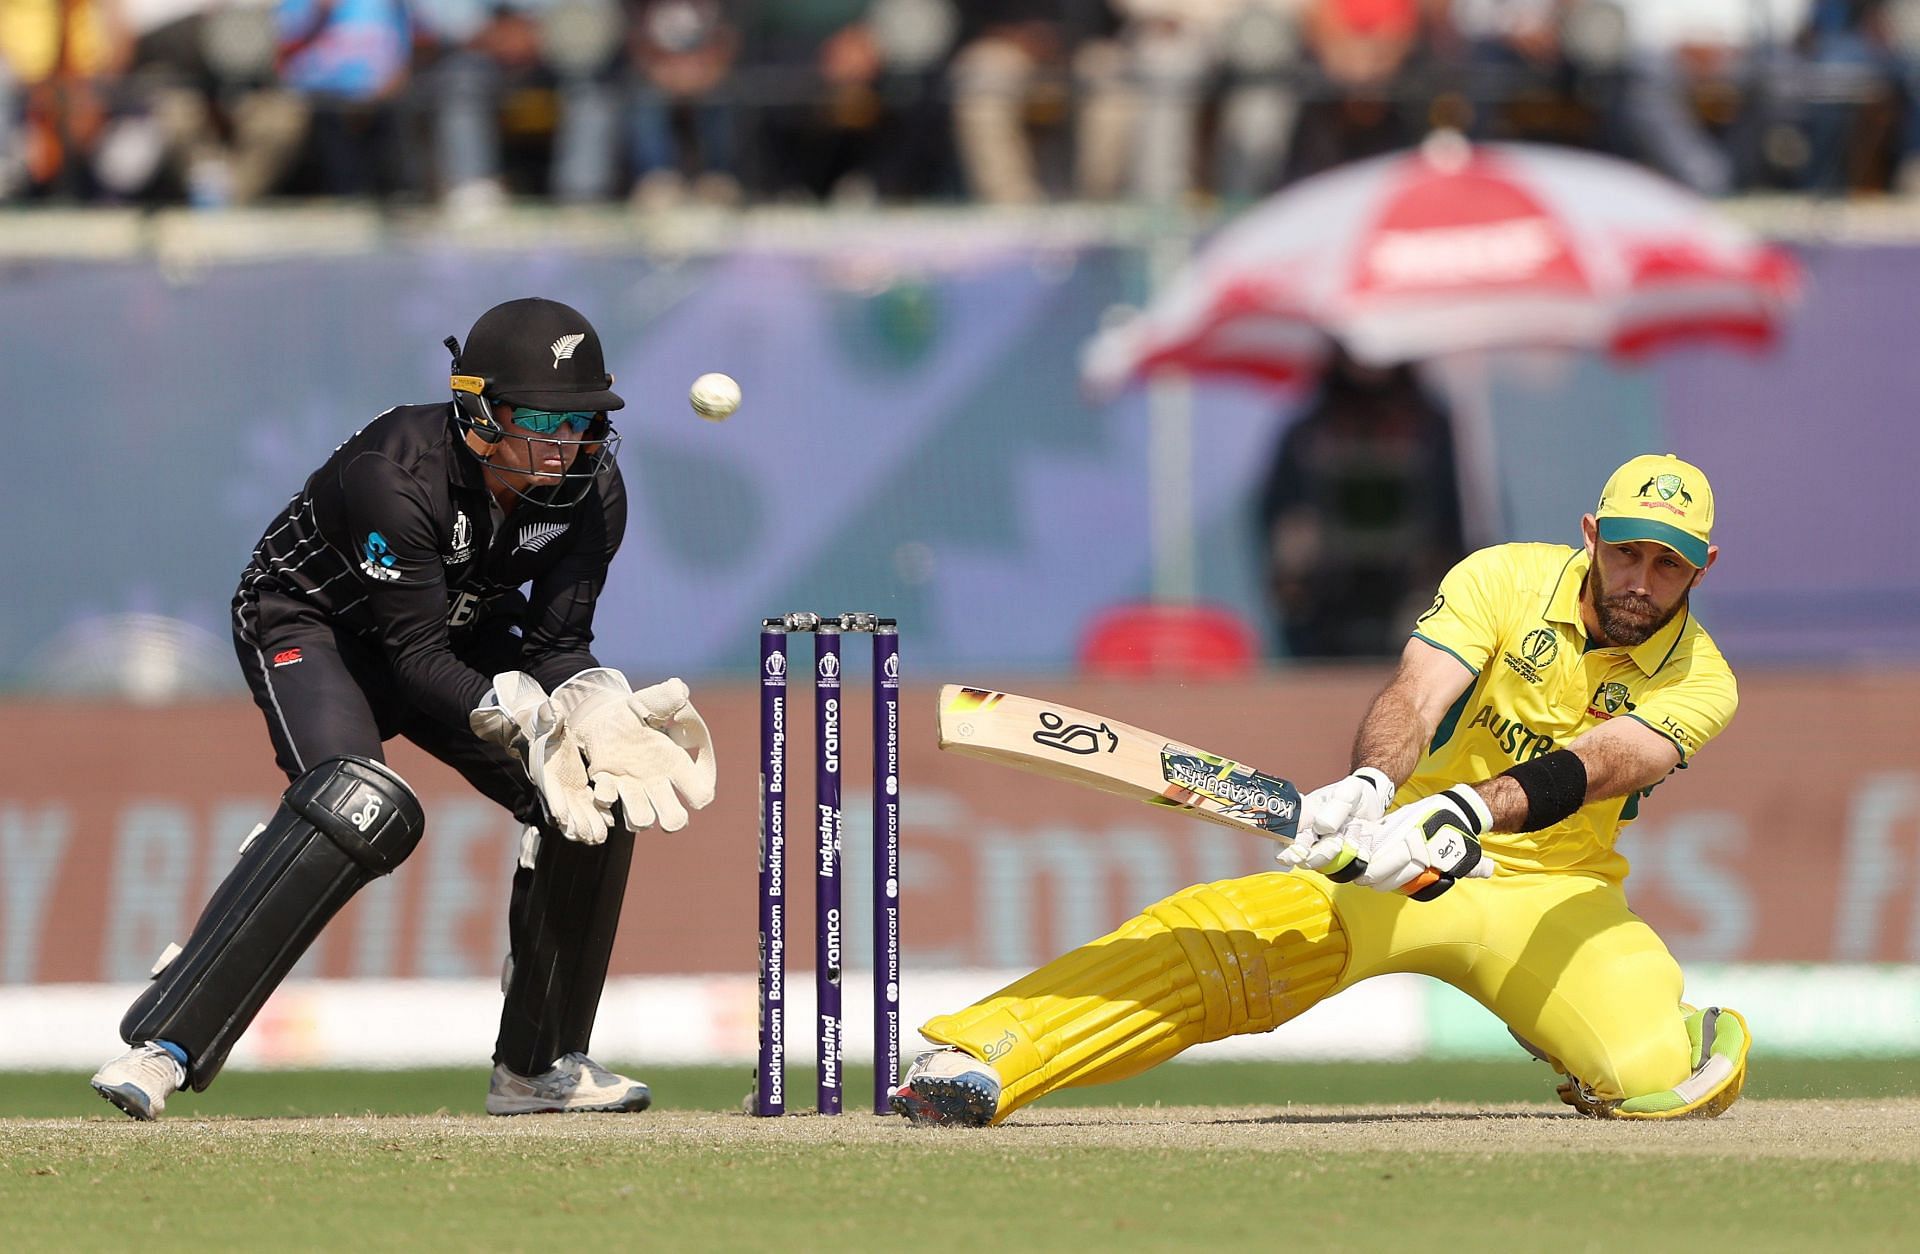 Glenn Maxwell while playing an outrageous shot vs NZ [Getty Images]